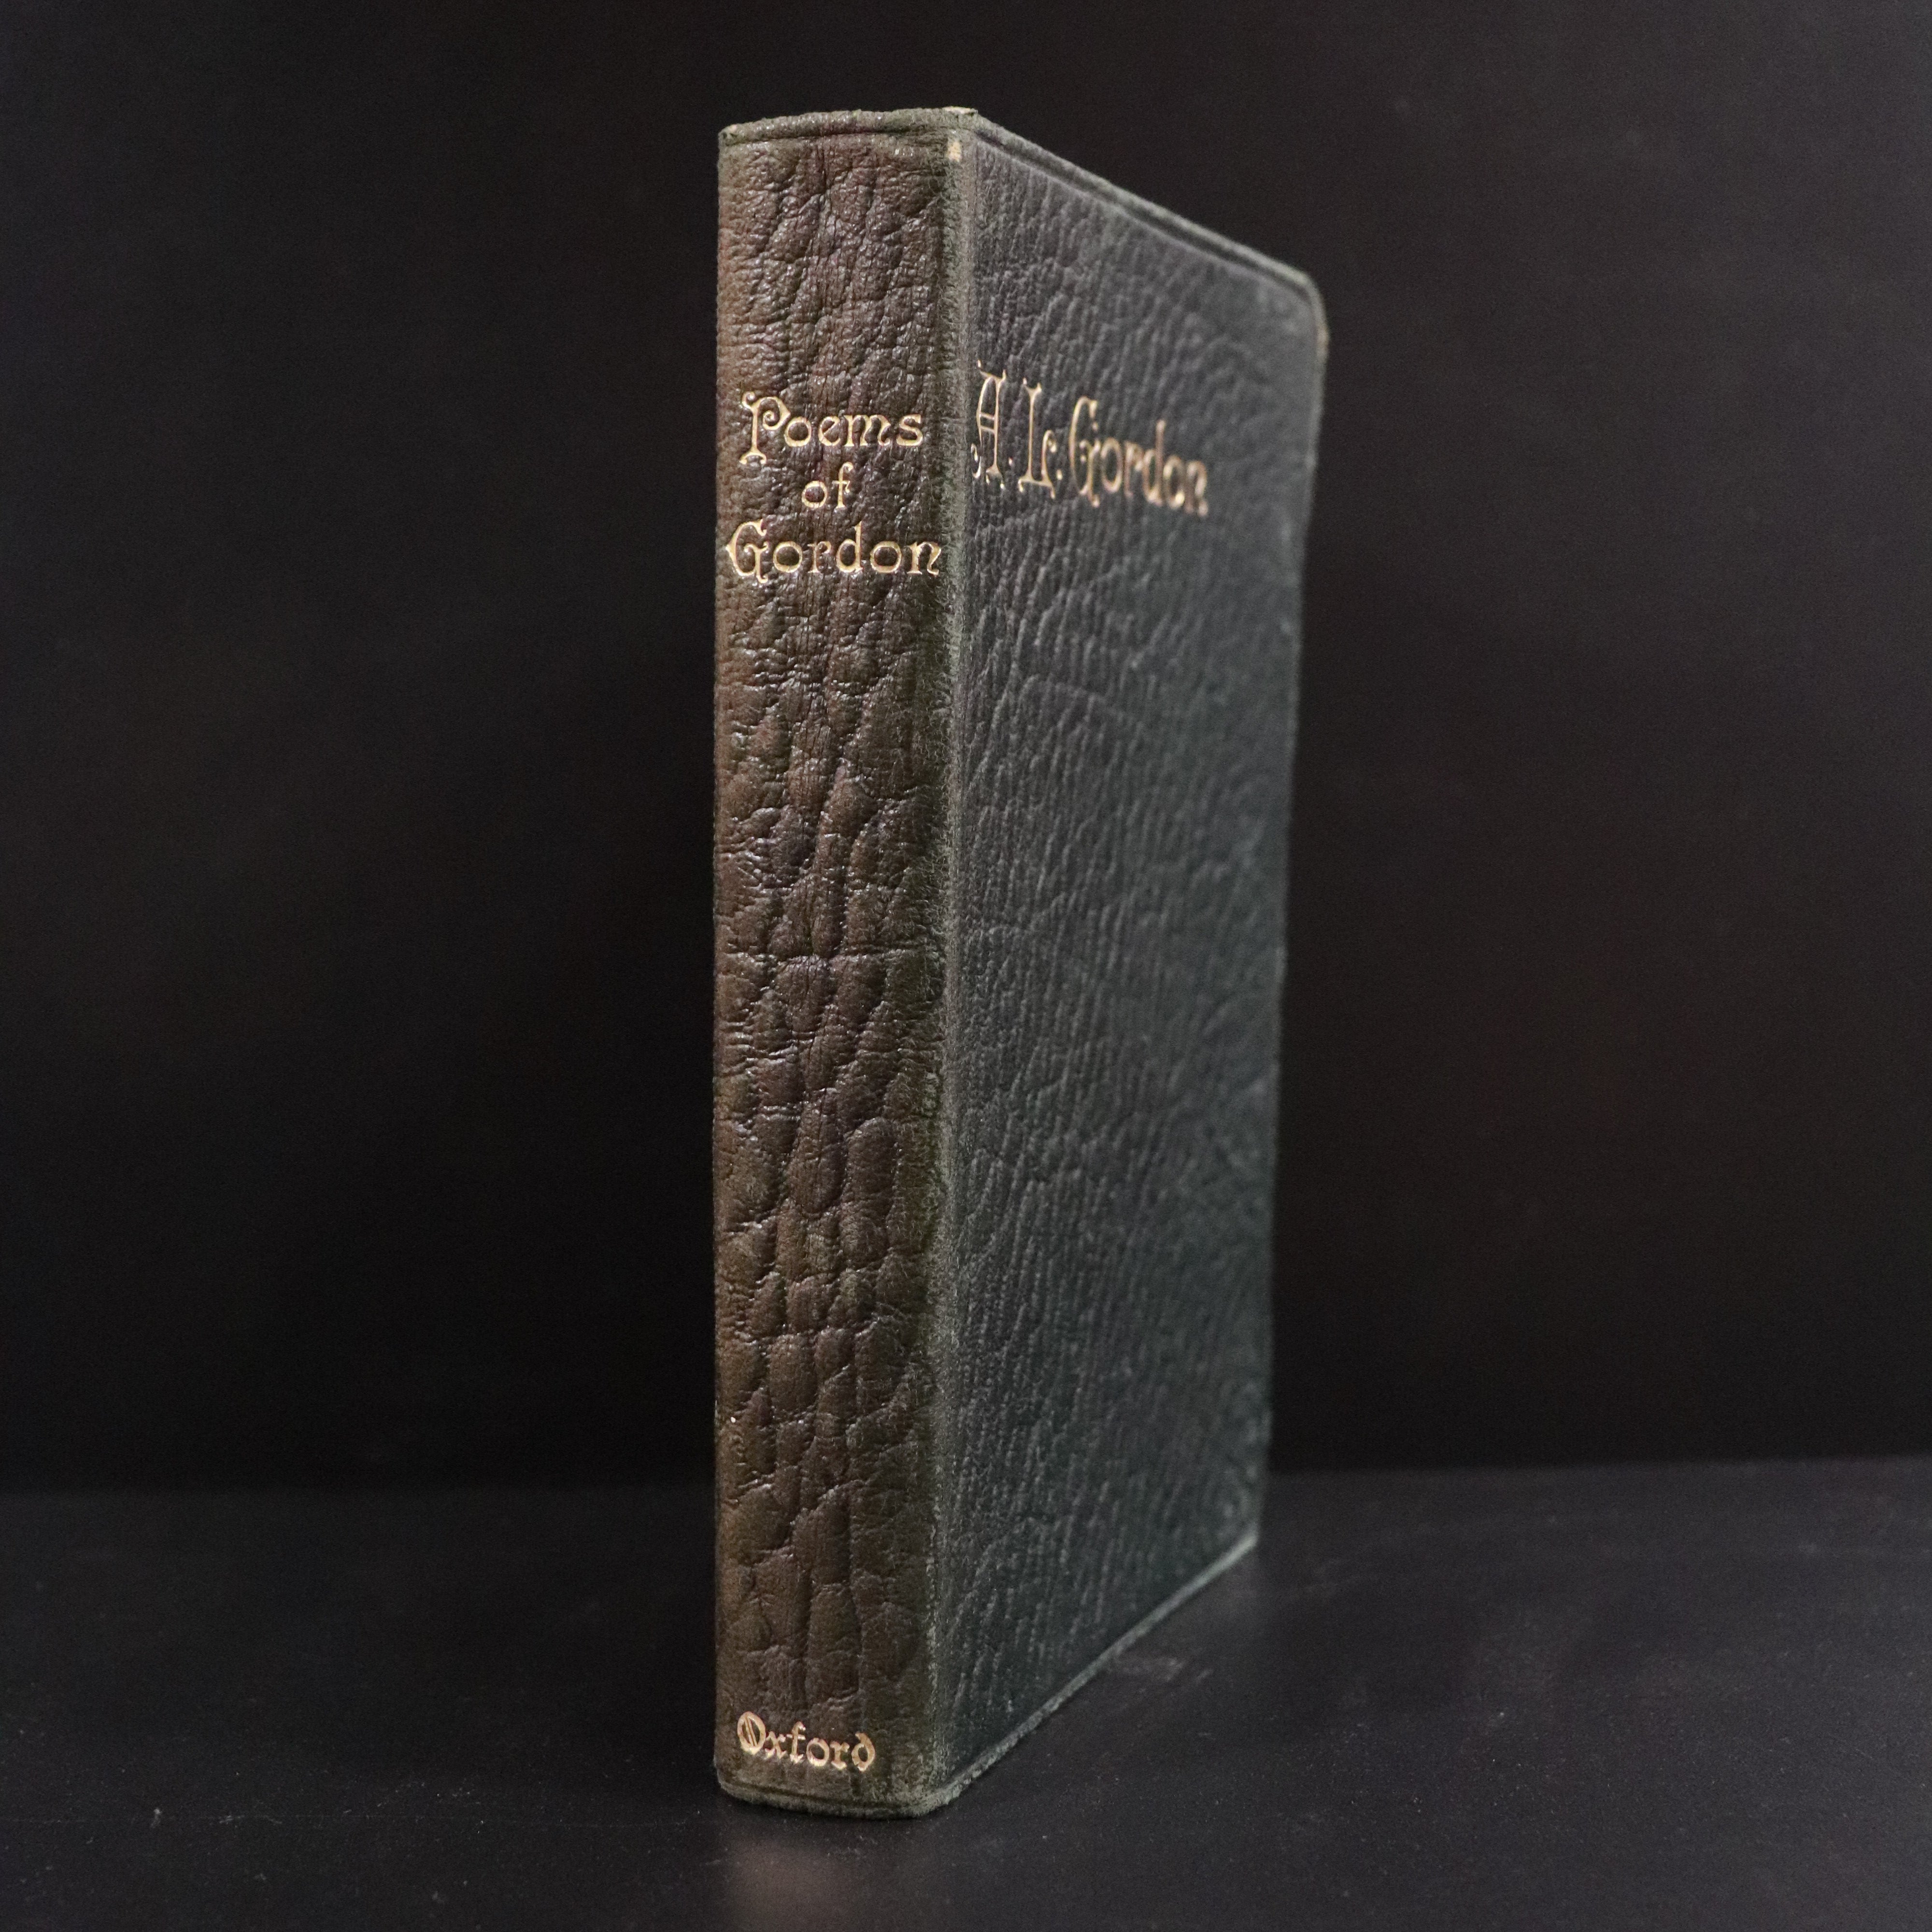 1923 The Poems Of Adam Lindsay Gordon Oxford Edition Antique Poetry Book